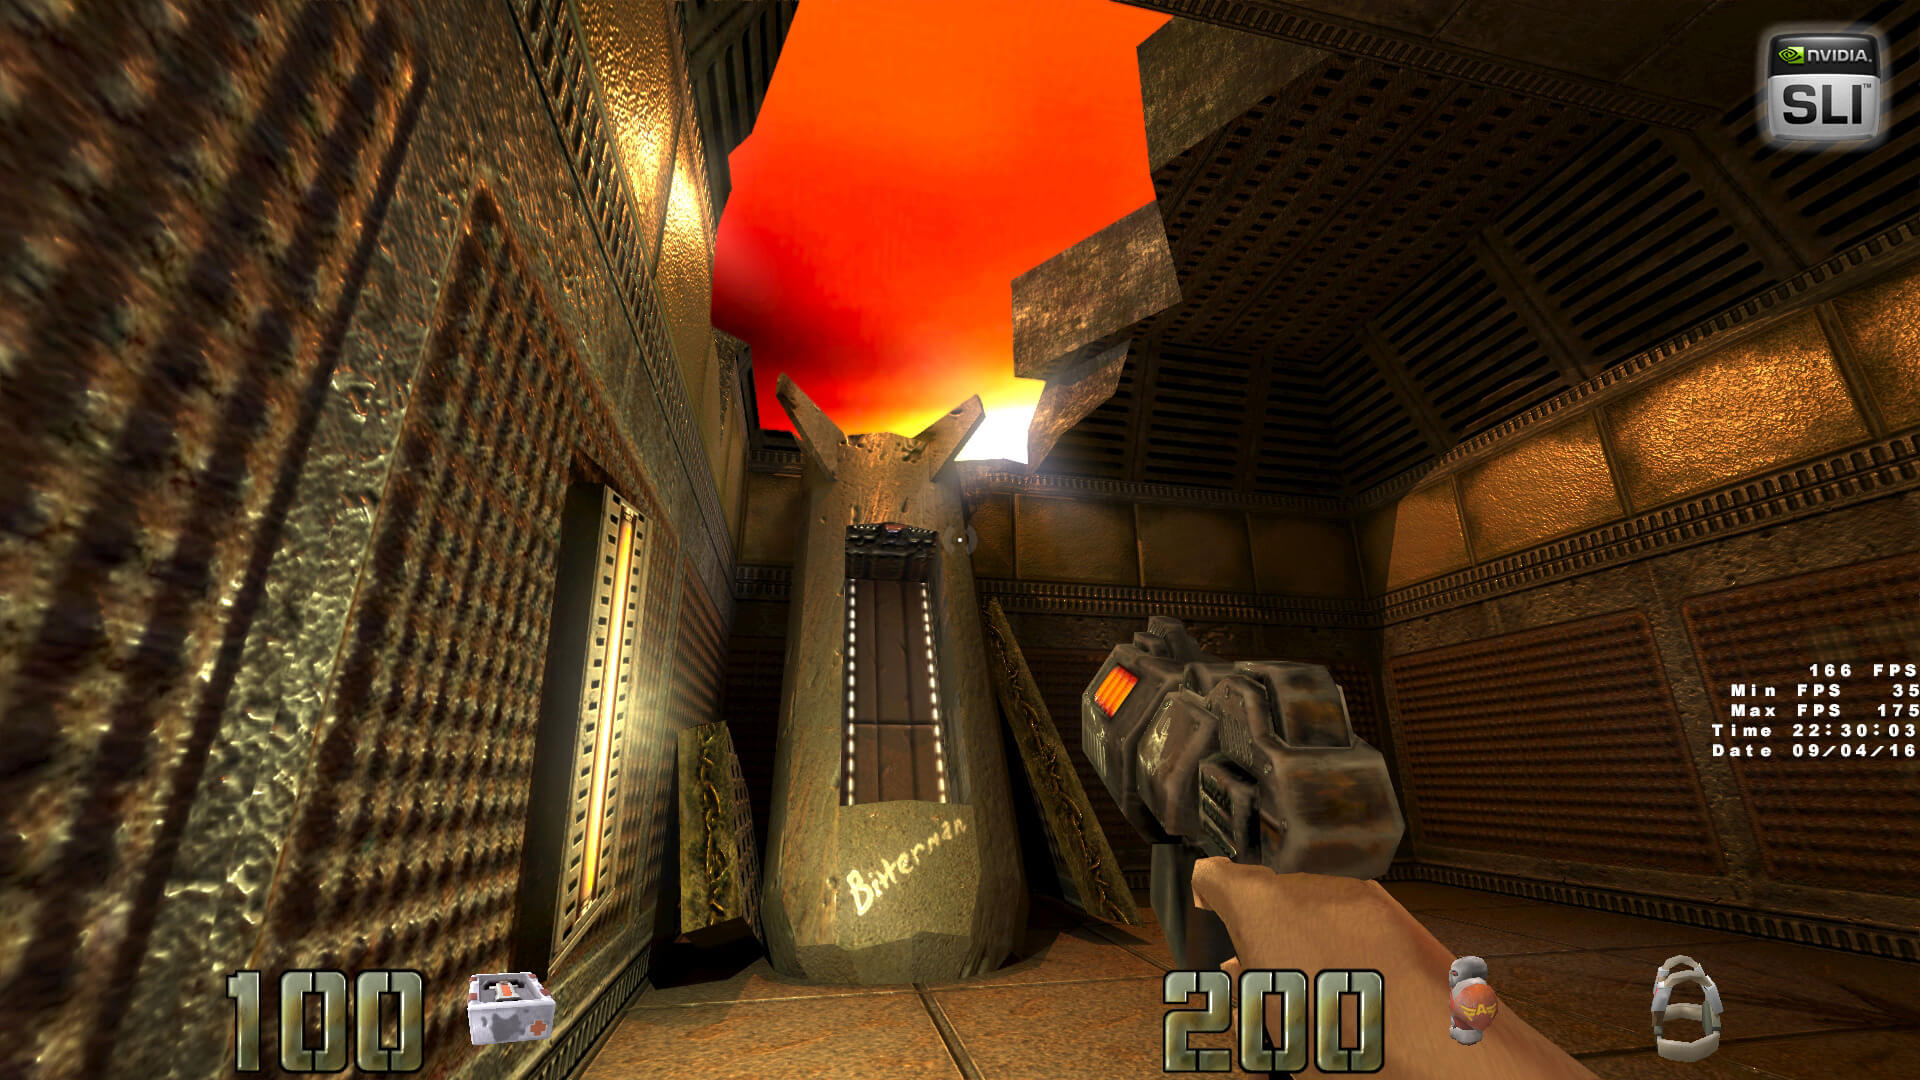 quake2xp-final-2018-version-is-available-for-download-adds-lots-of